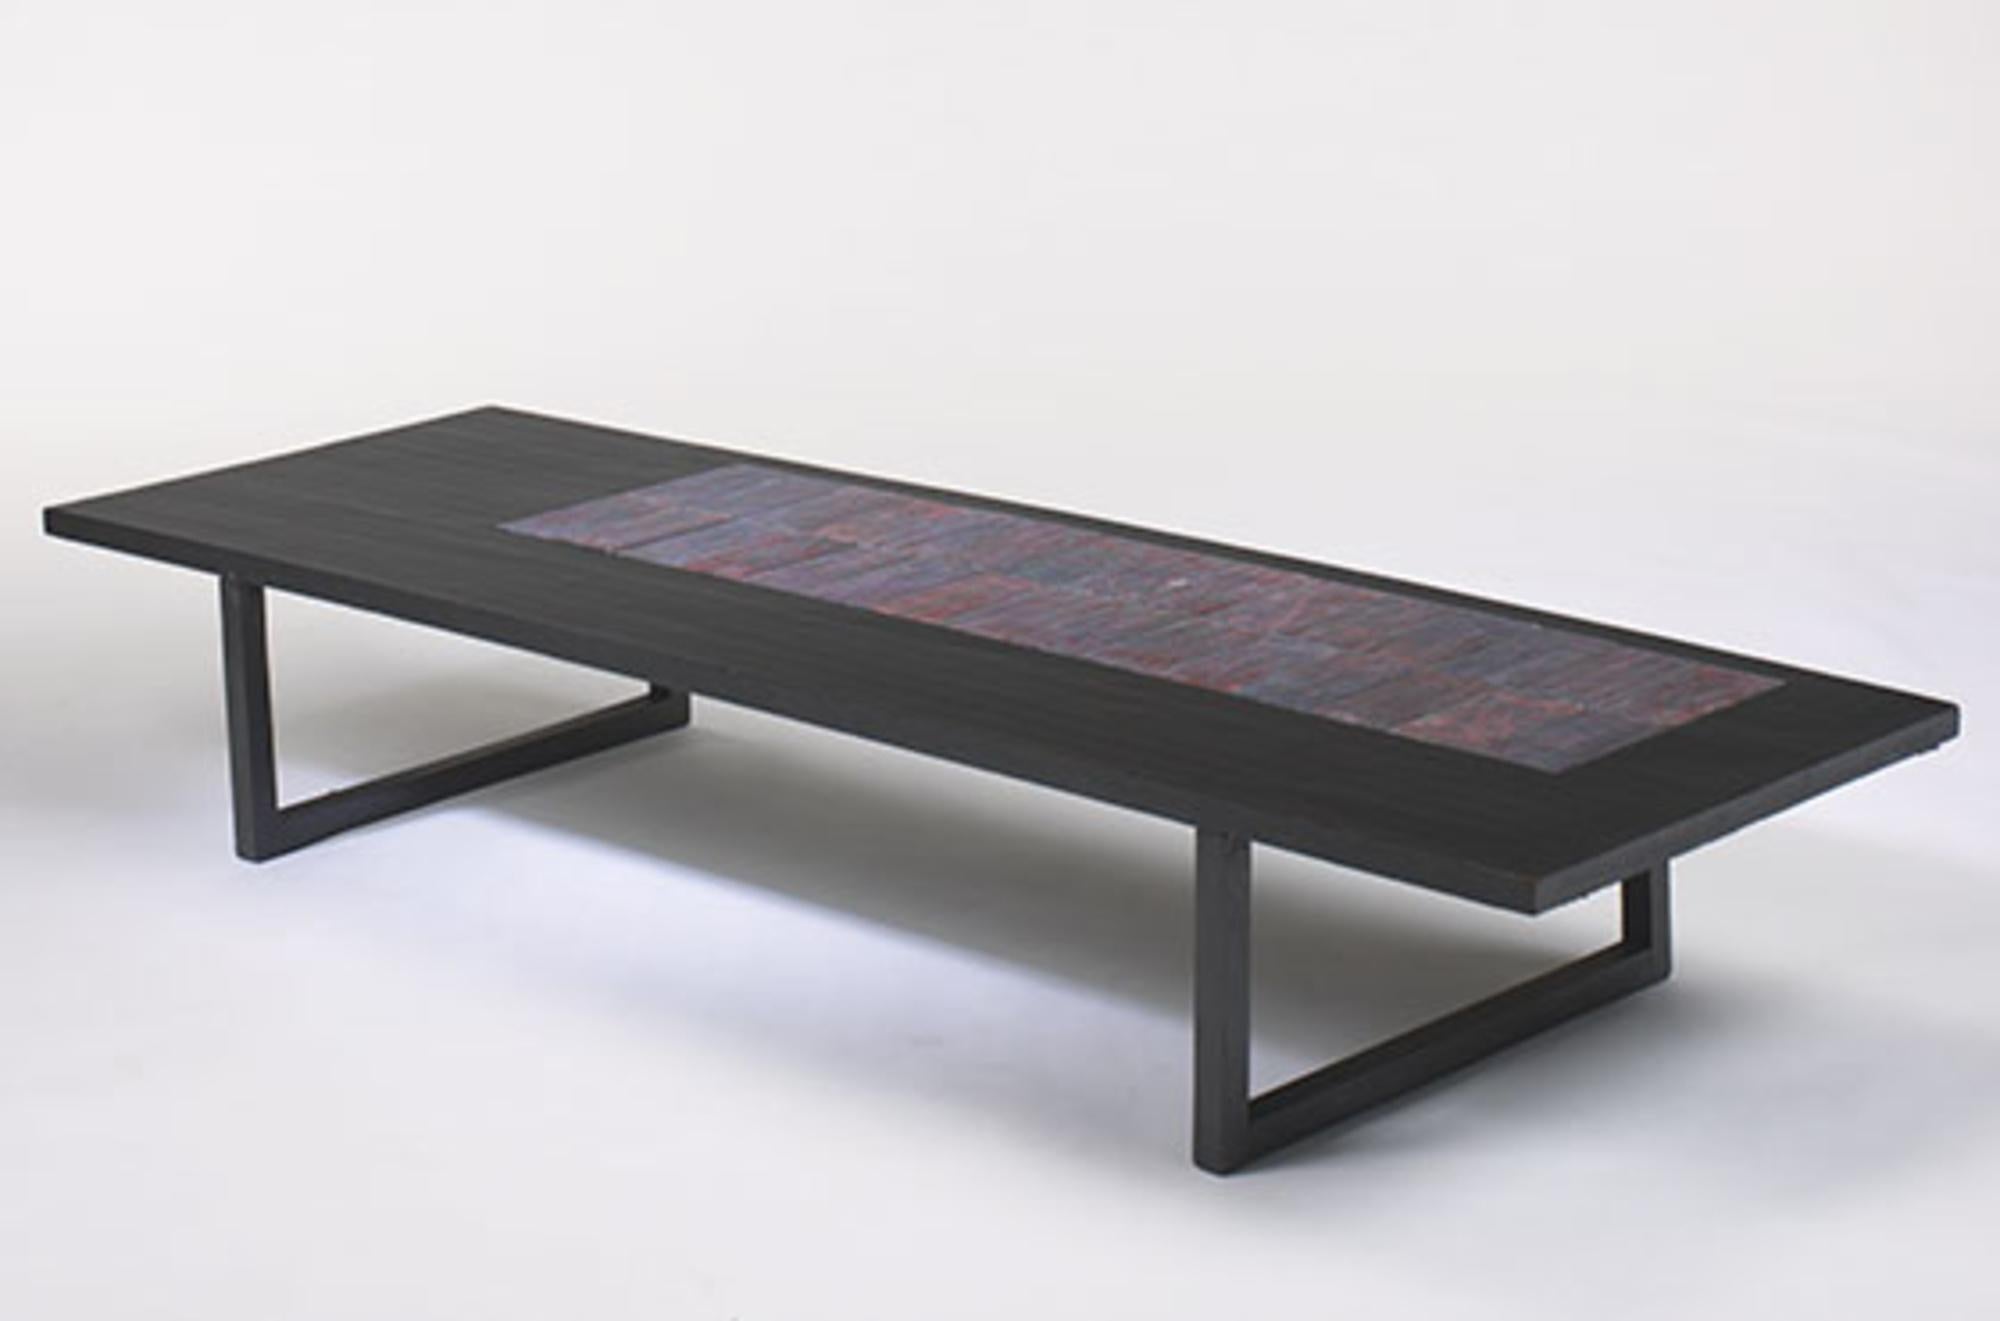 1970 Coffee table - Joaquim Teinreiro lacquered wood, glazed ceramic.
Label + tax stamps of the time 
Circa 1970
Measures: 160 x 53 x 27cms.
19900€.
 